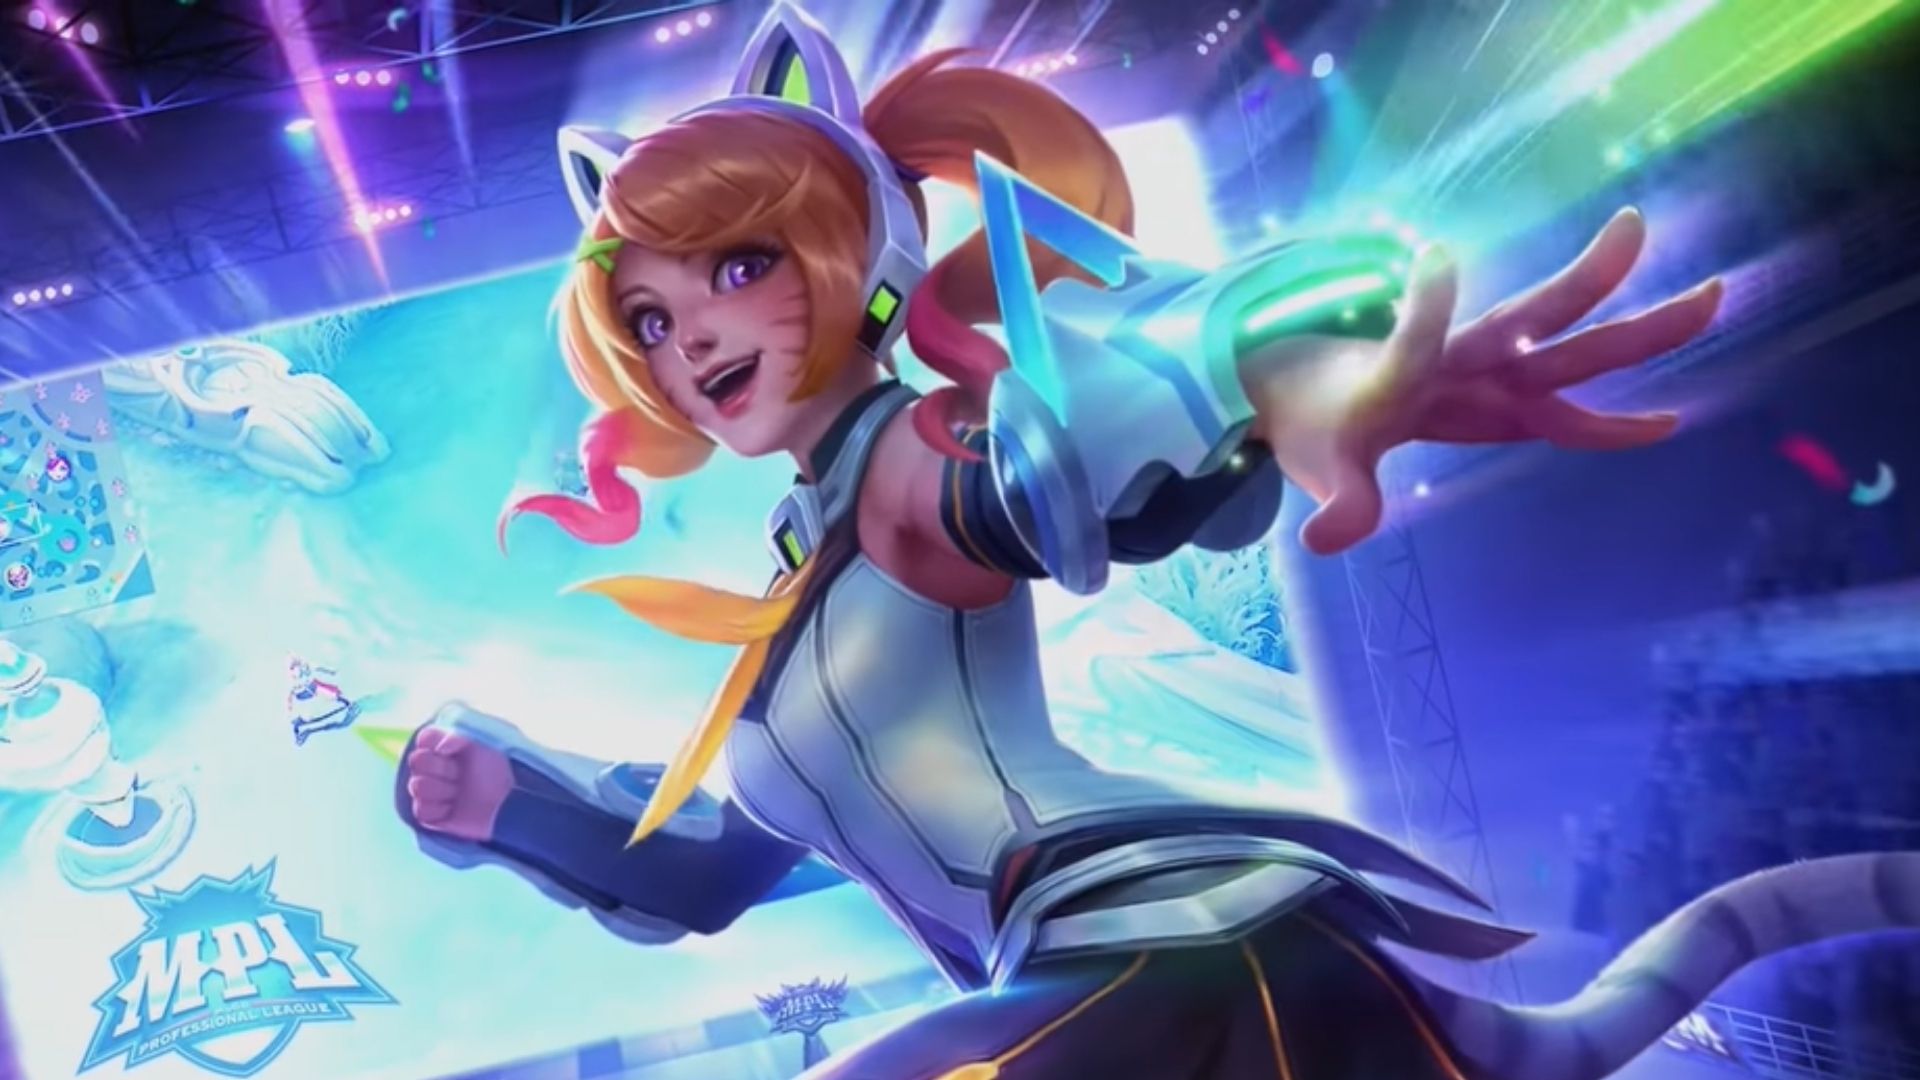 Get Hyped! E Girl Wanwan Is The First MPL Skin Of Its Kind